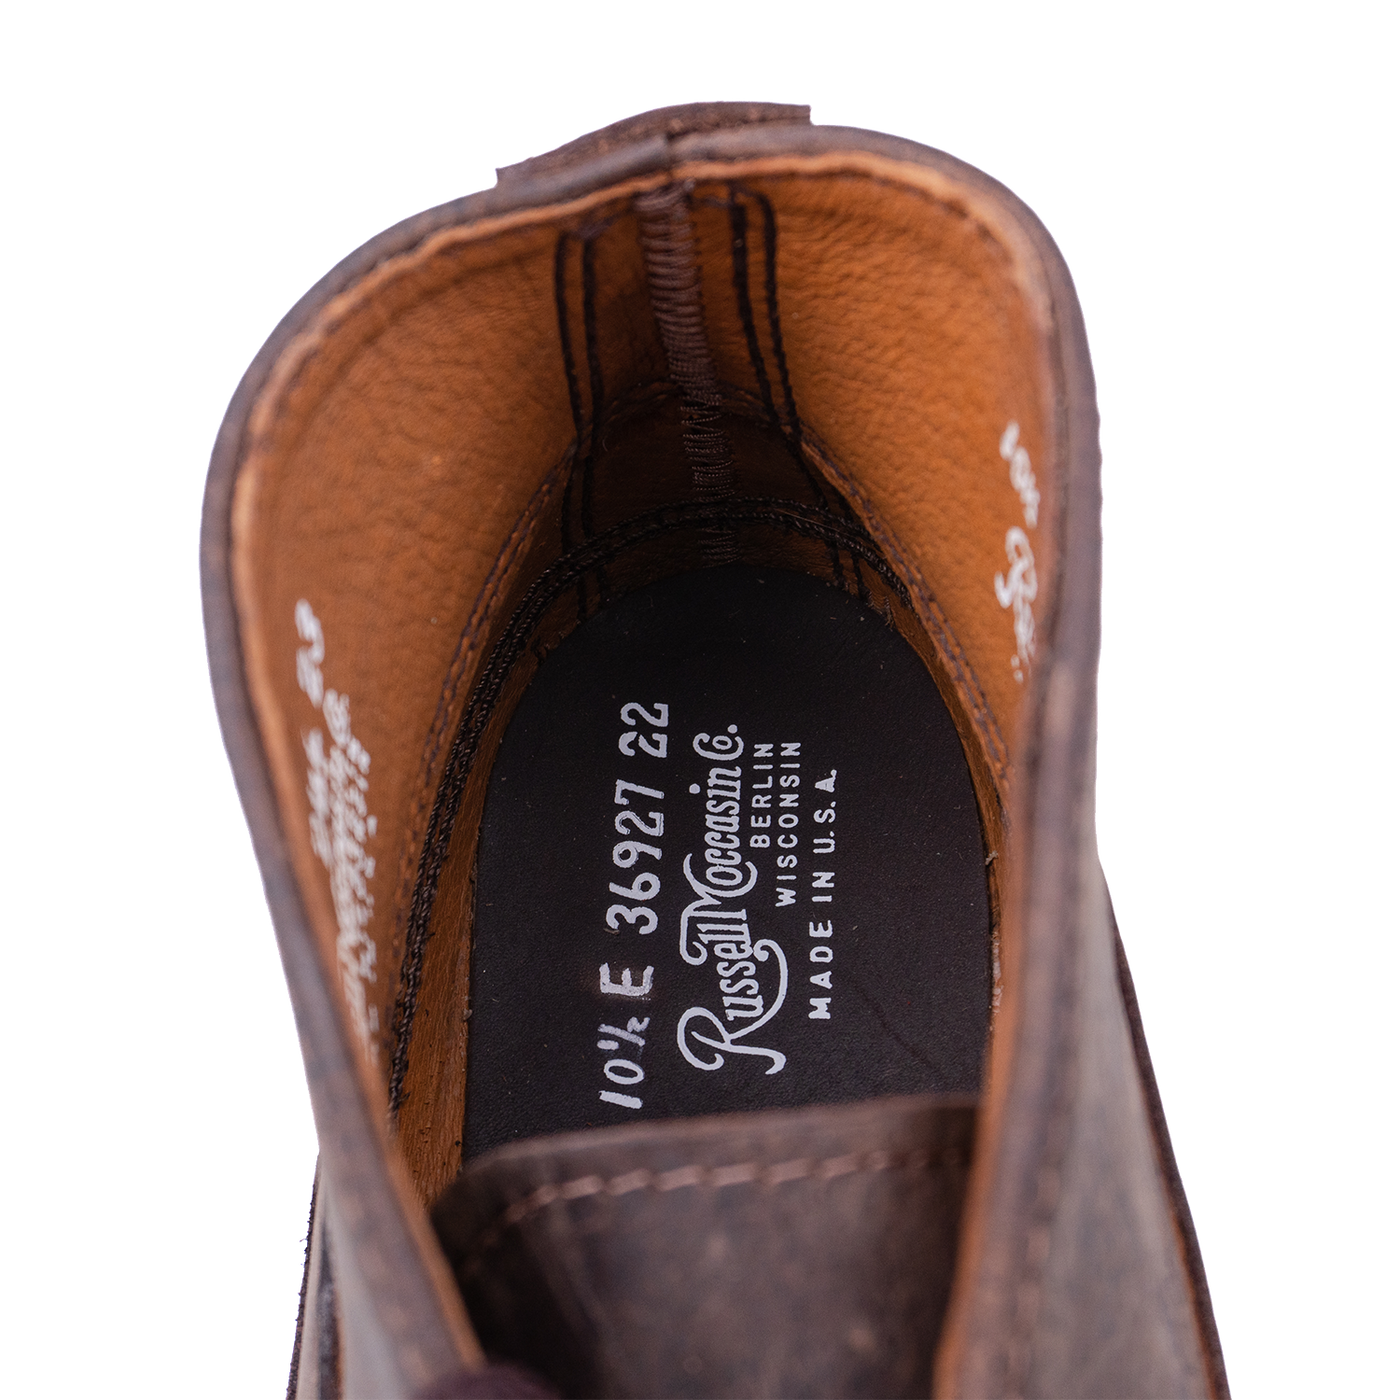 Sporting Clays Chukka – Russell Moccasin